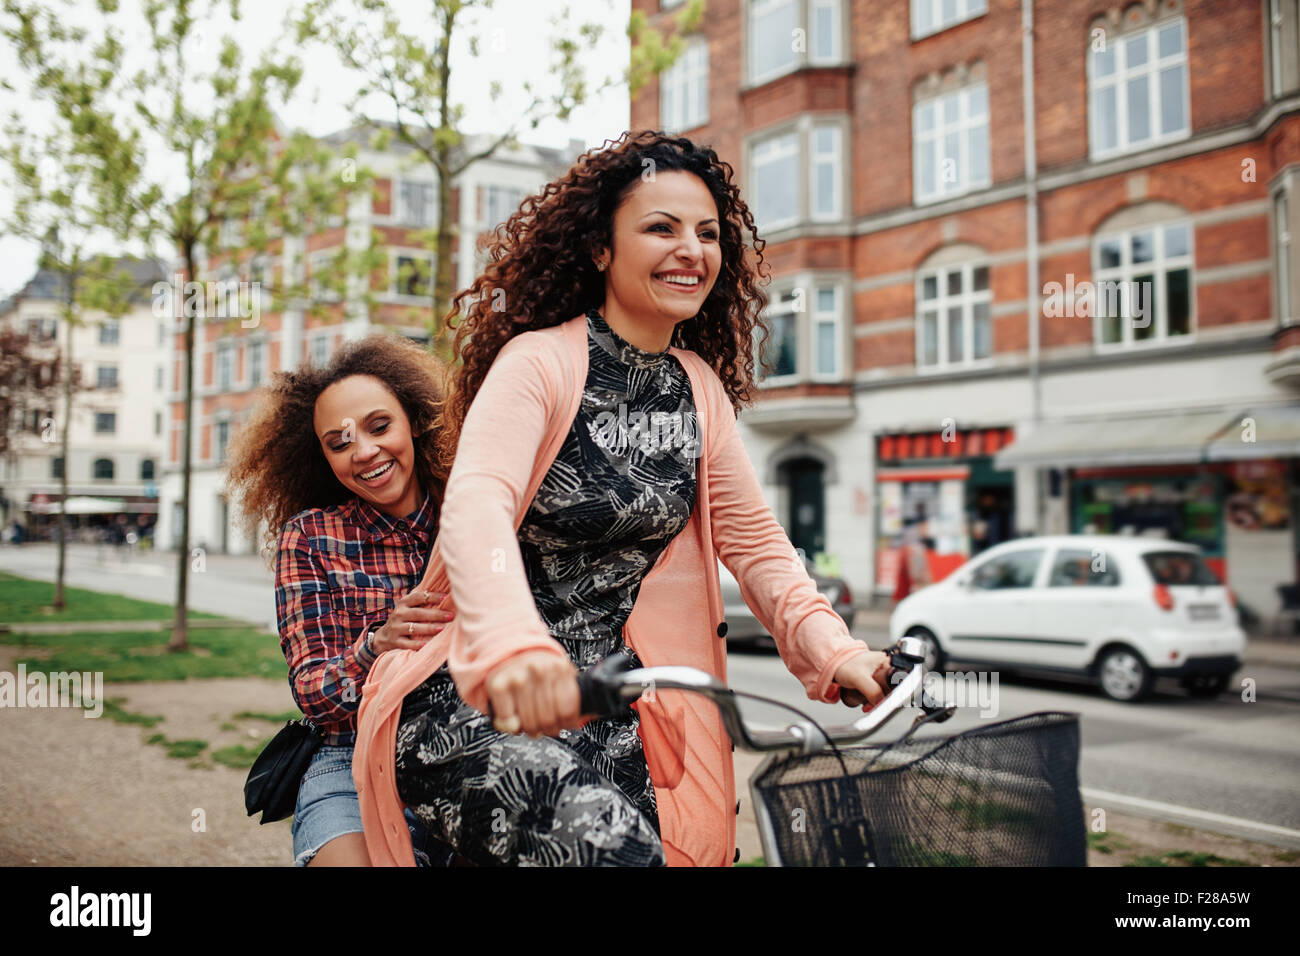 Portrait of cheerful young friends riding a bicycle in the city. Young girls outdoors enjoying bicycle ride on street. Stock Photo